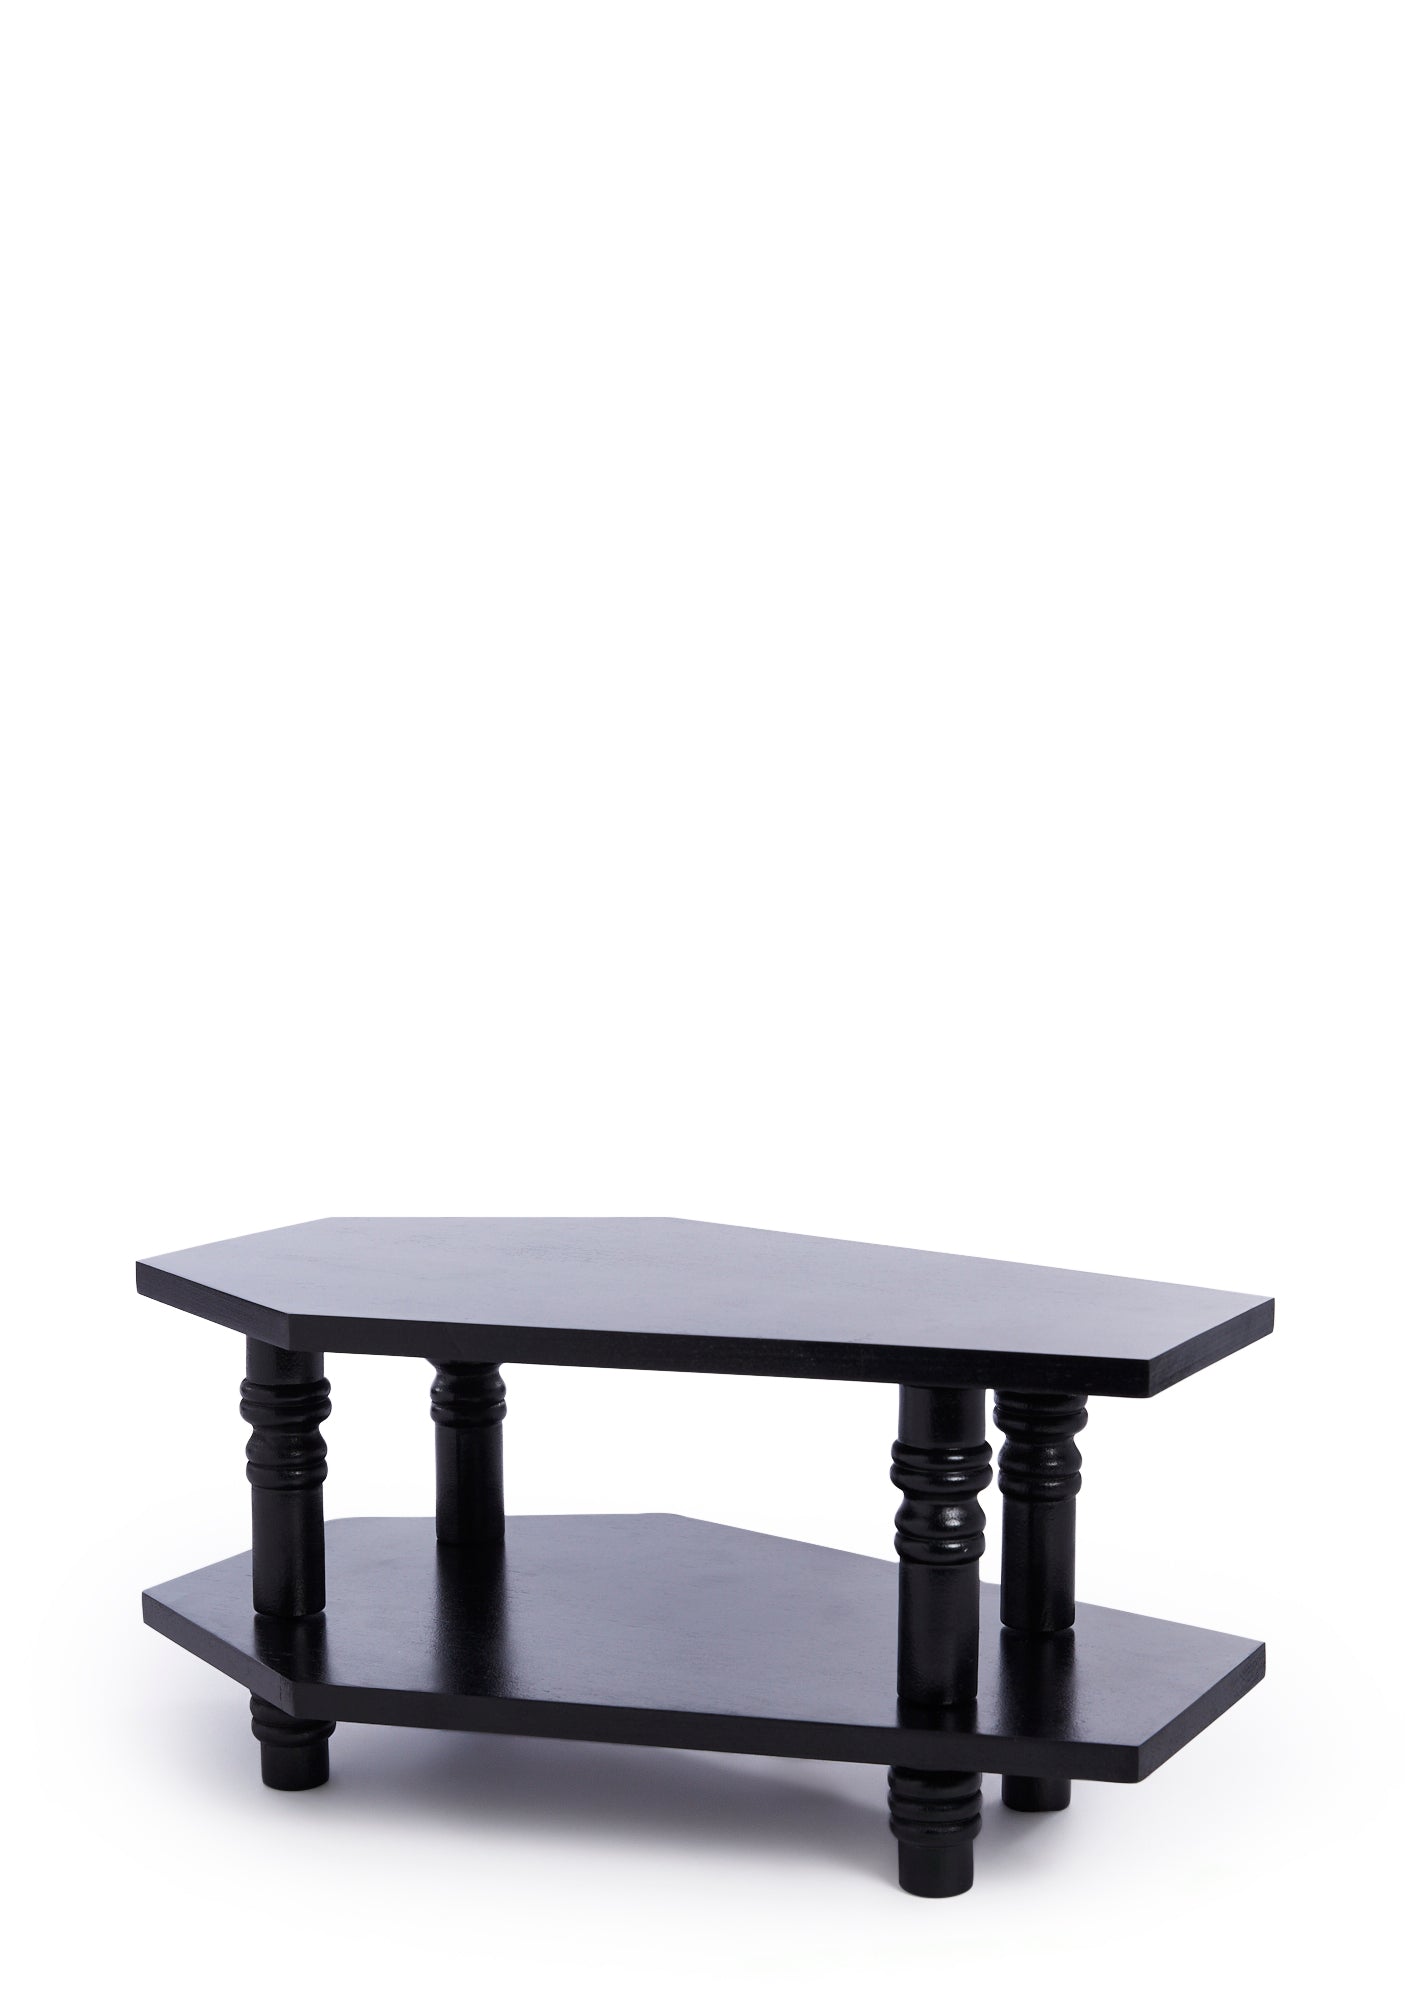 Dolls Home Coffin Double Decker Coffee Table - Black